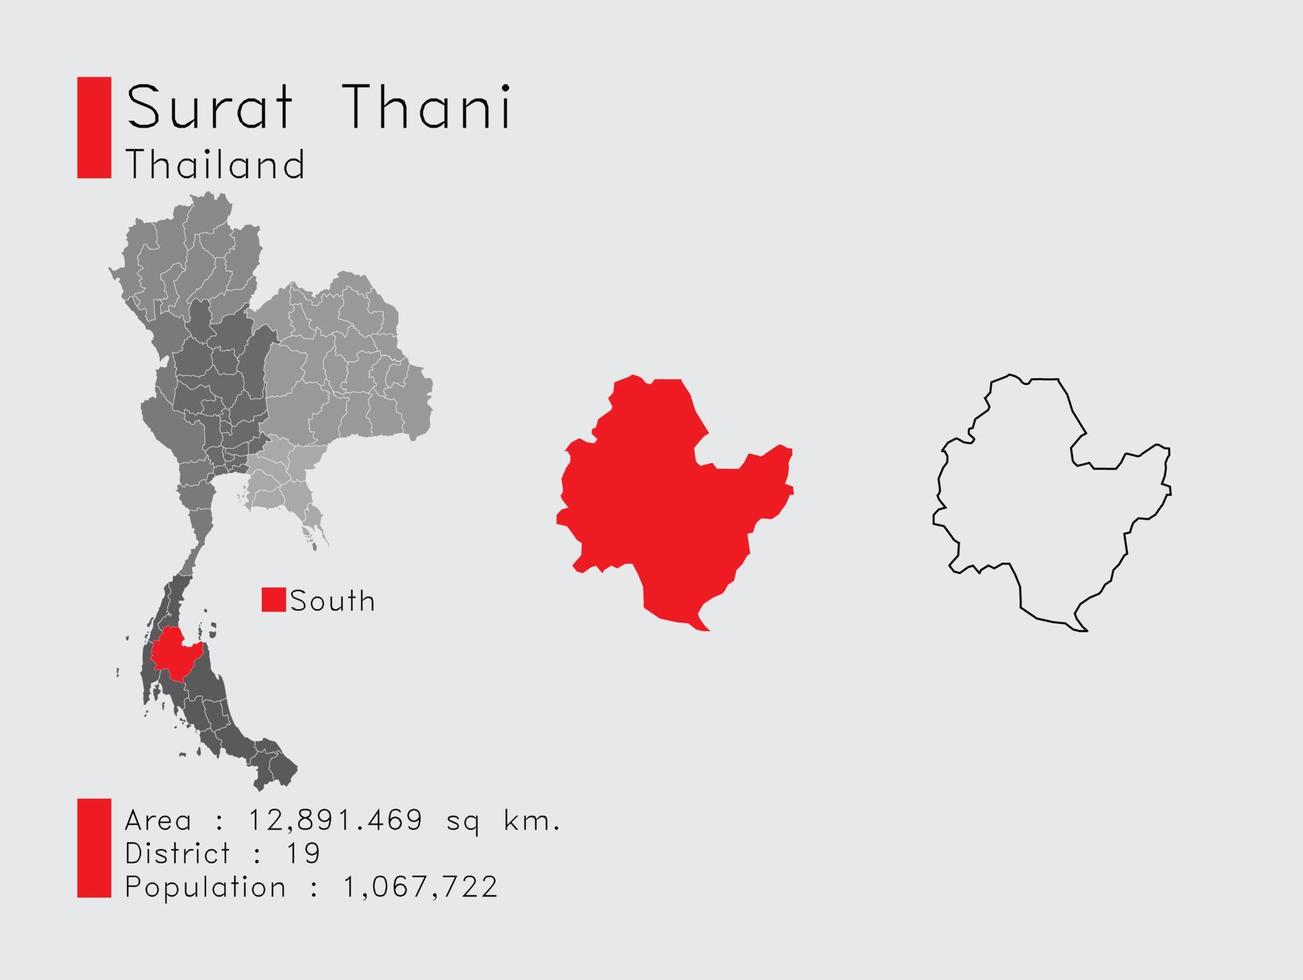 SuratThani Position in Thailand A Set of Infographic Elements for the Province. and Area District Population and Outline. Vector with Gray Background.